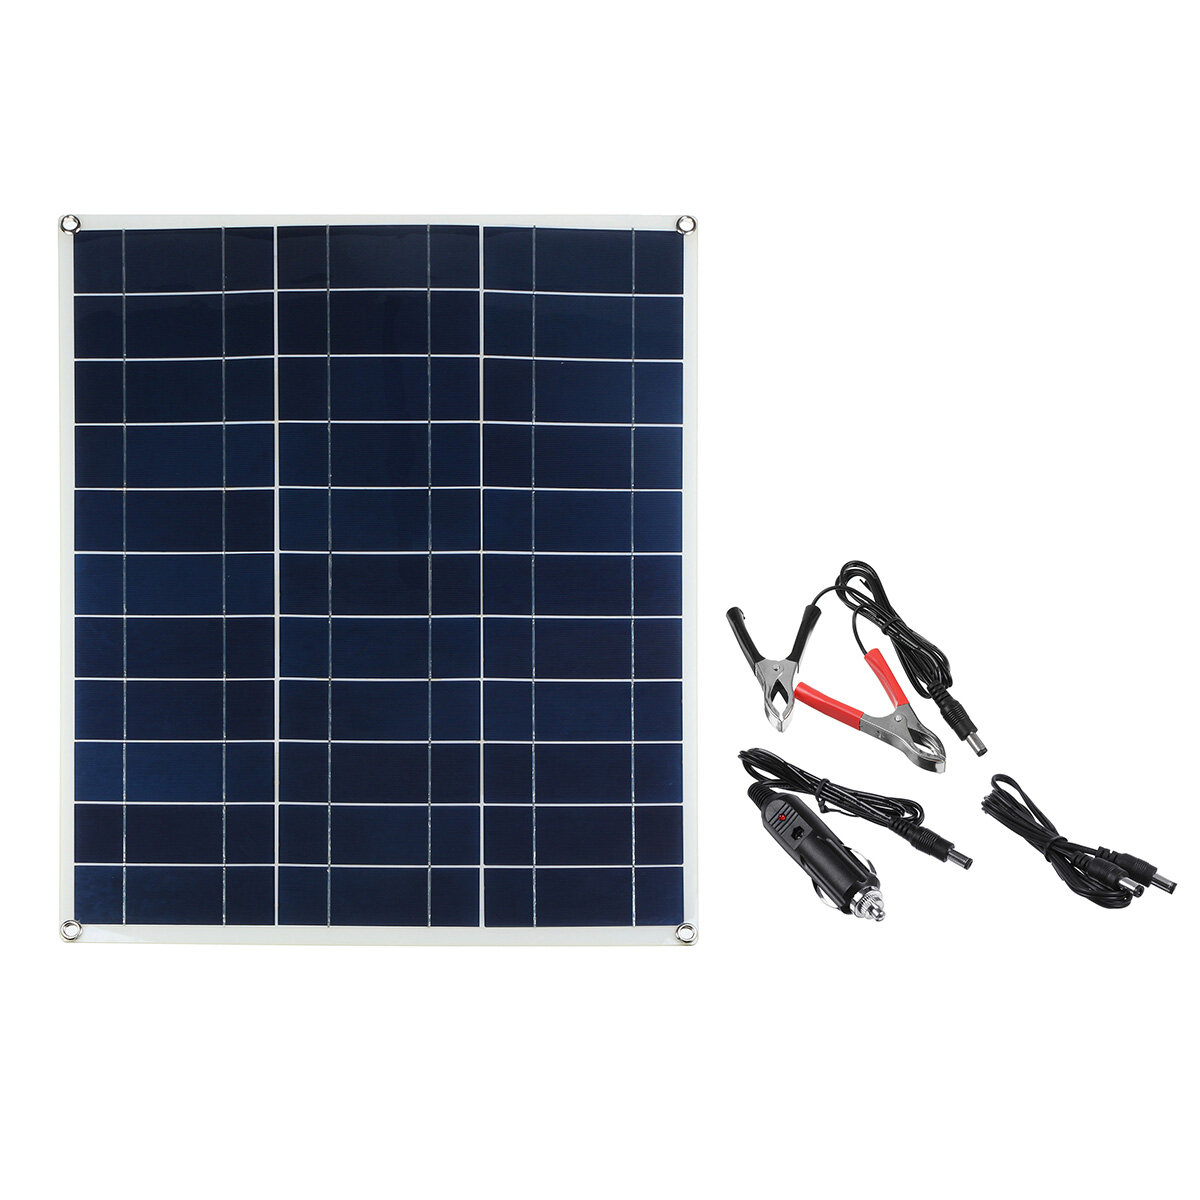 Image of 50W 18VDC 60x50cm Polycrystalline Flexible Light Solar Panel with Charging Cable+Alligator Clip